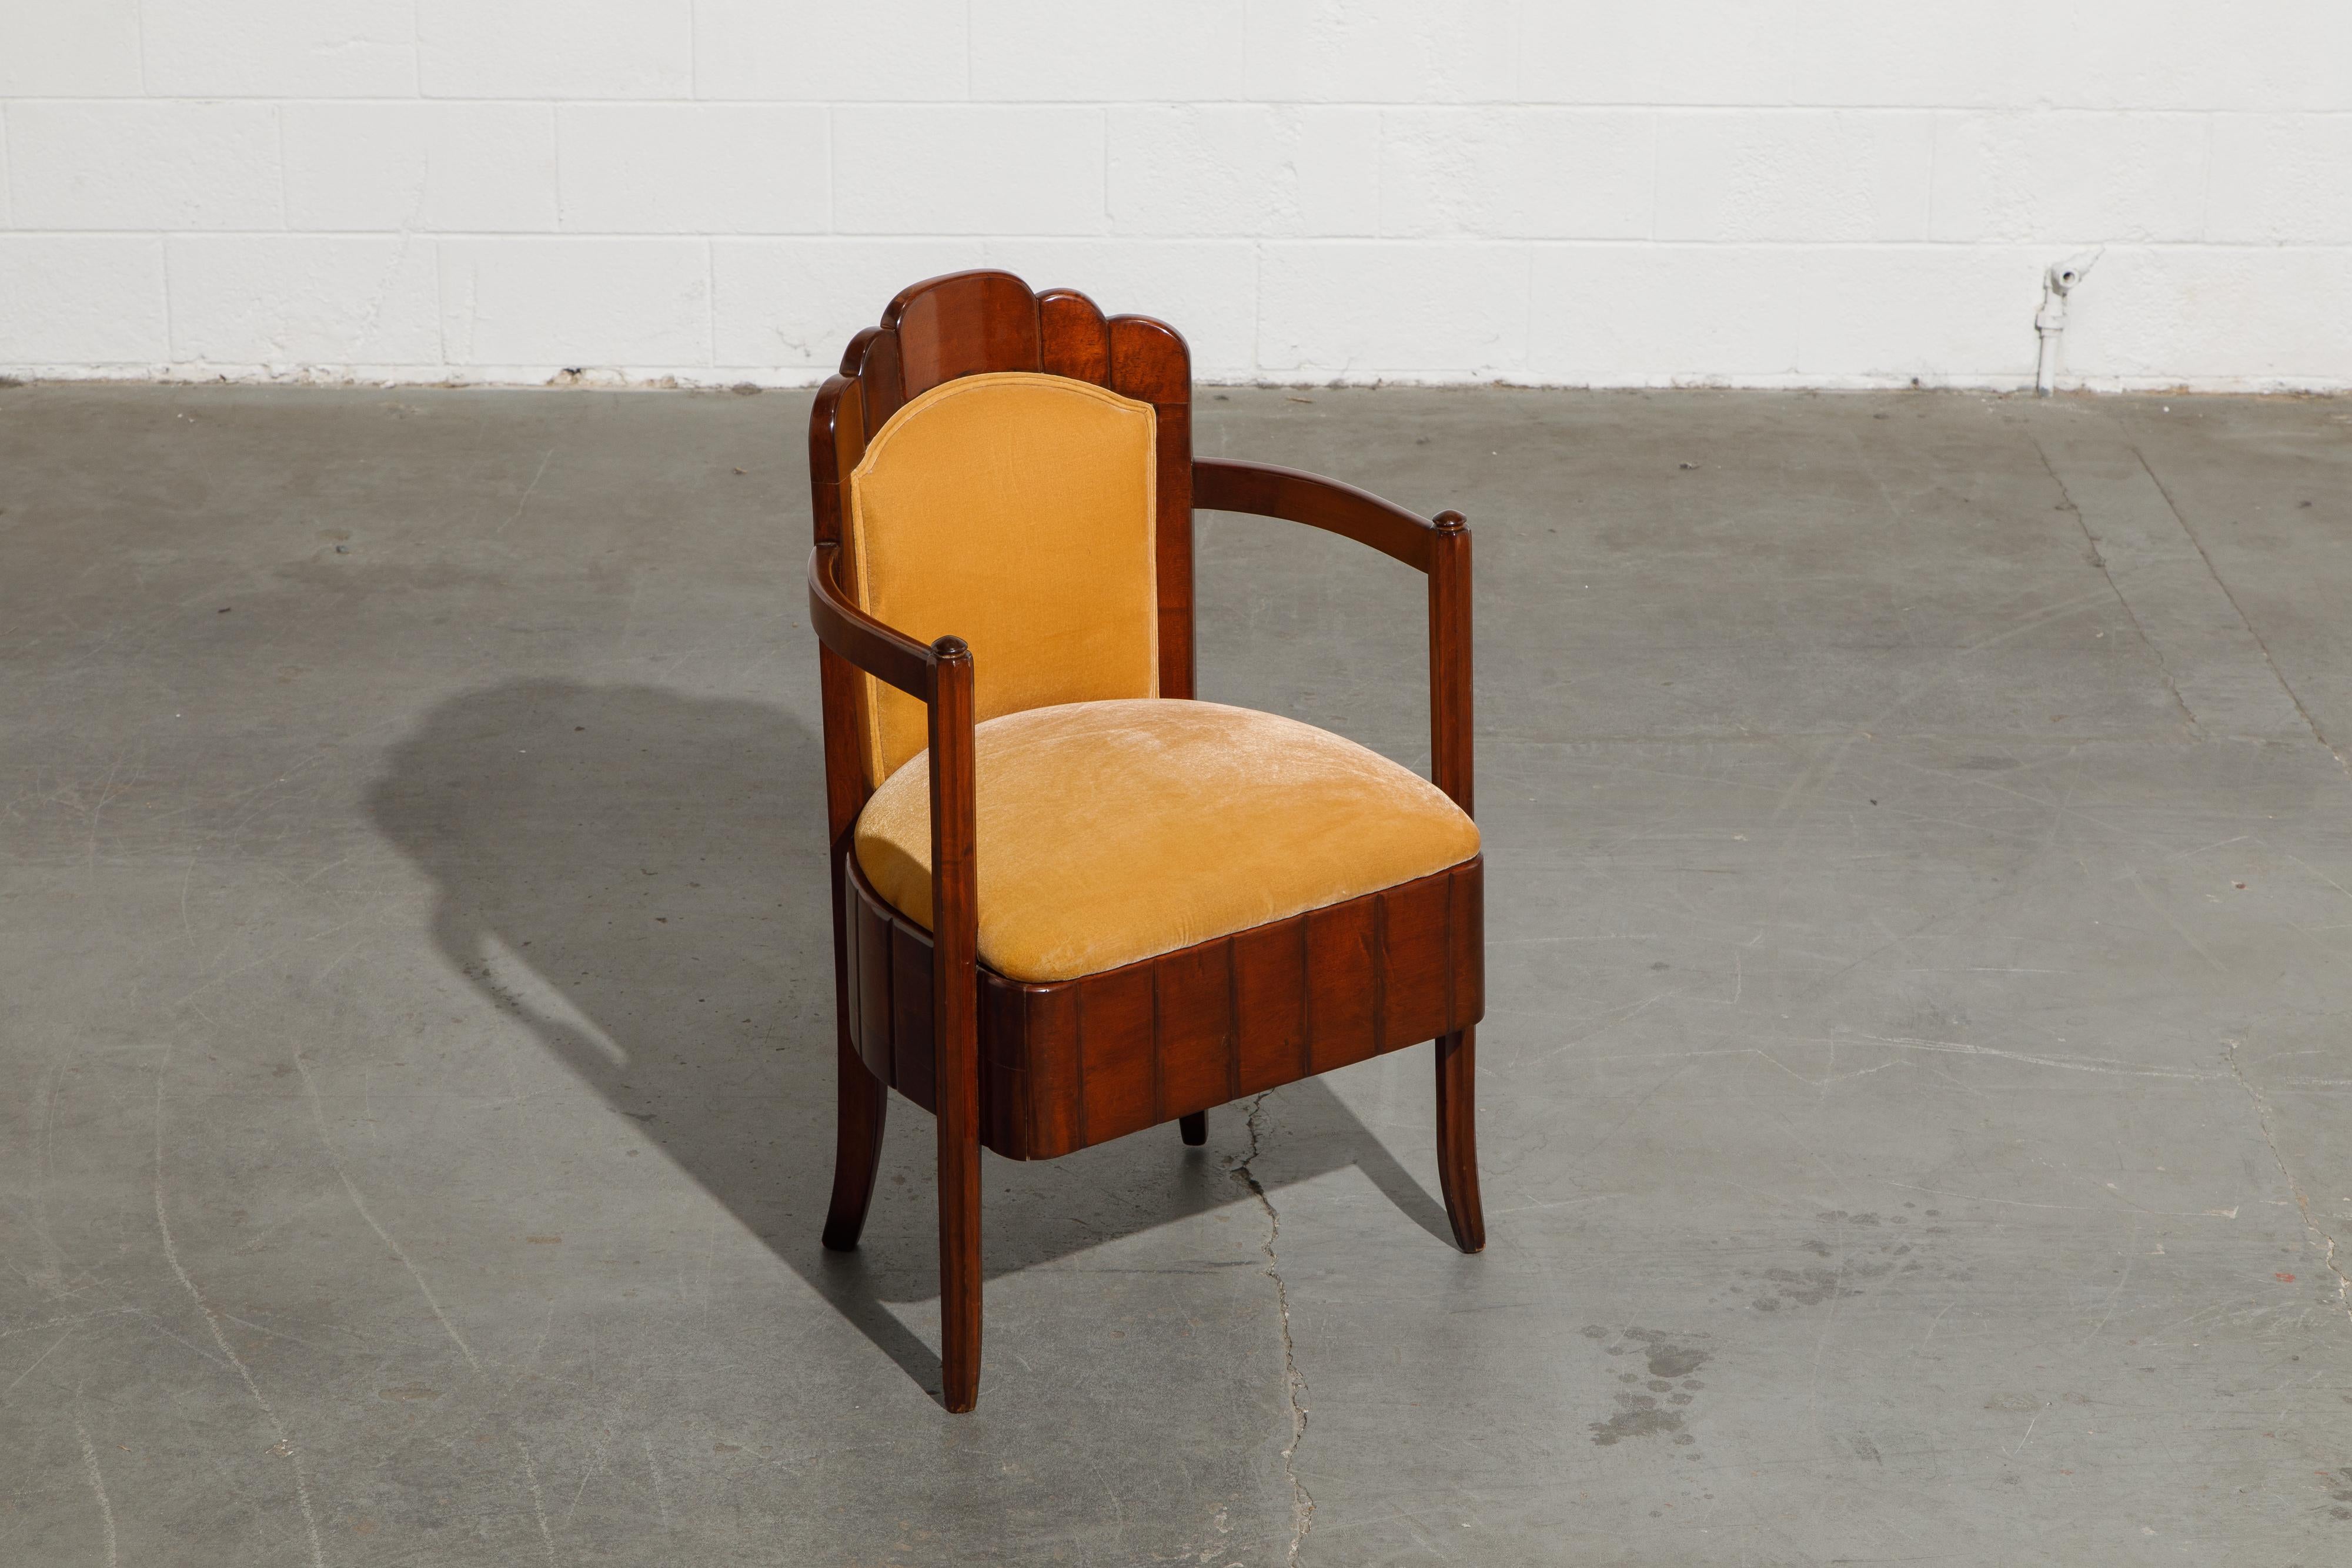 Important Pierre Patout Mahogany Dining Chairs from S.S. Île de France, c. 1927 For Sale 3